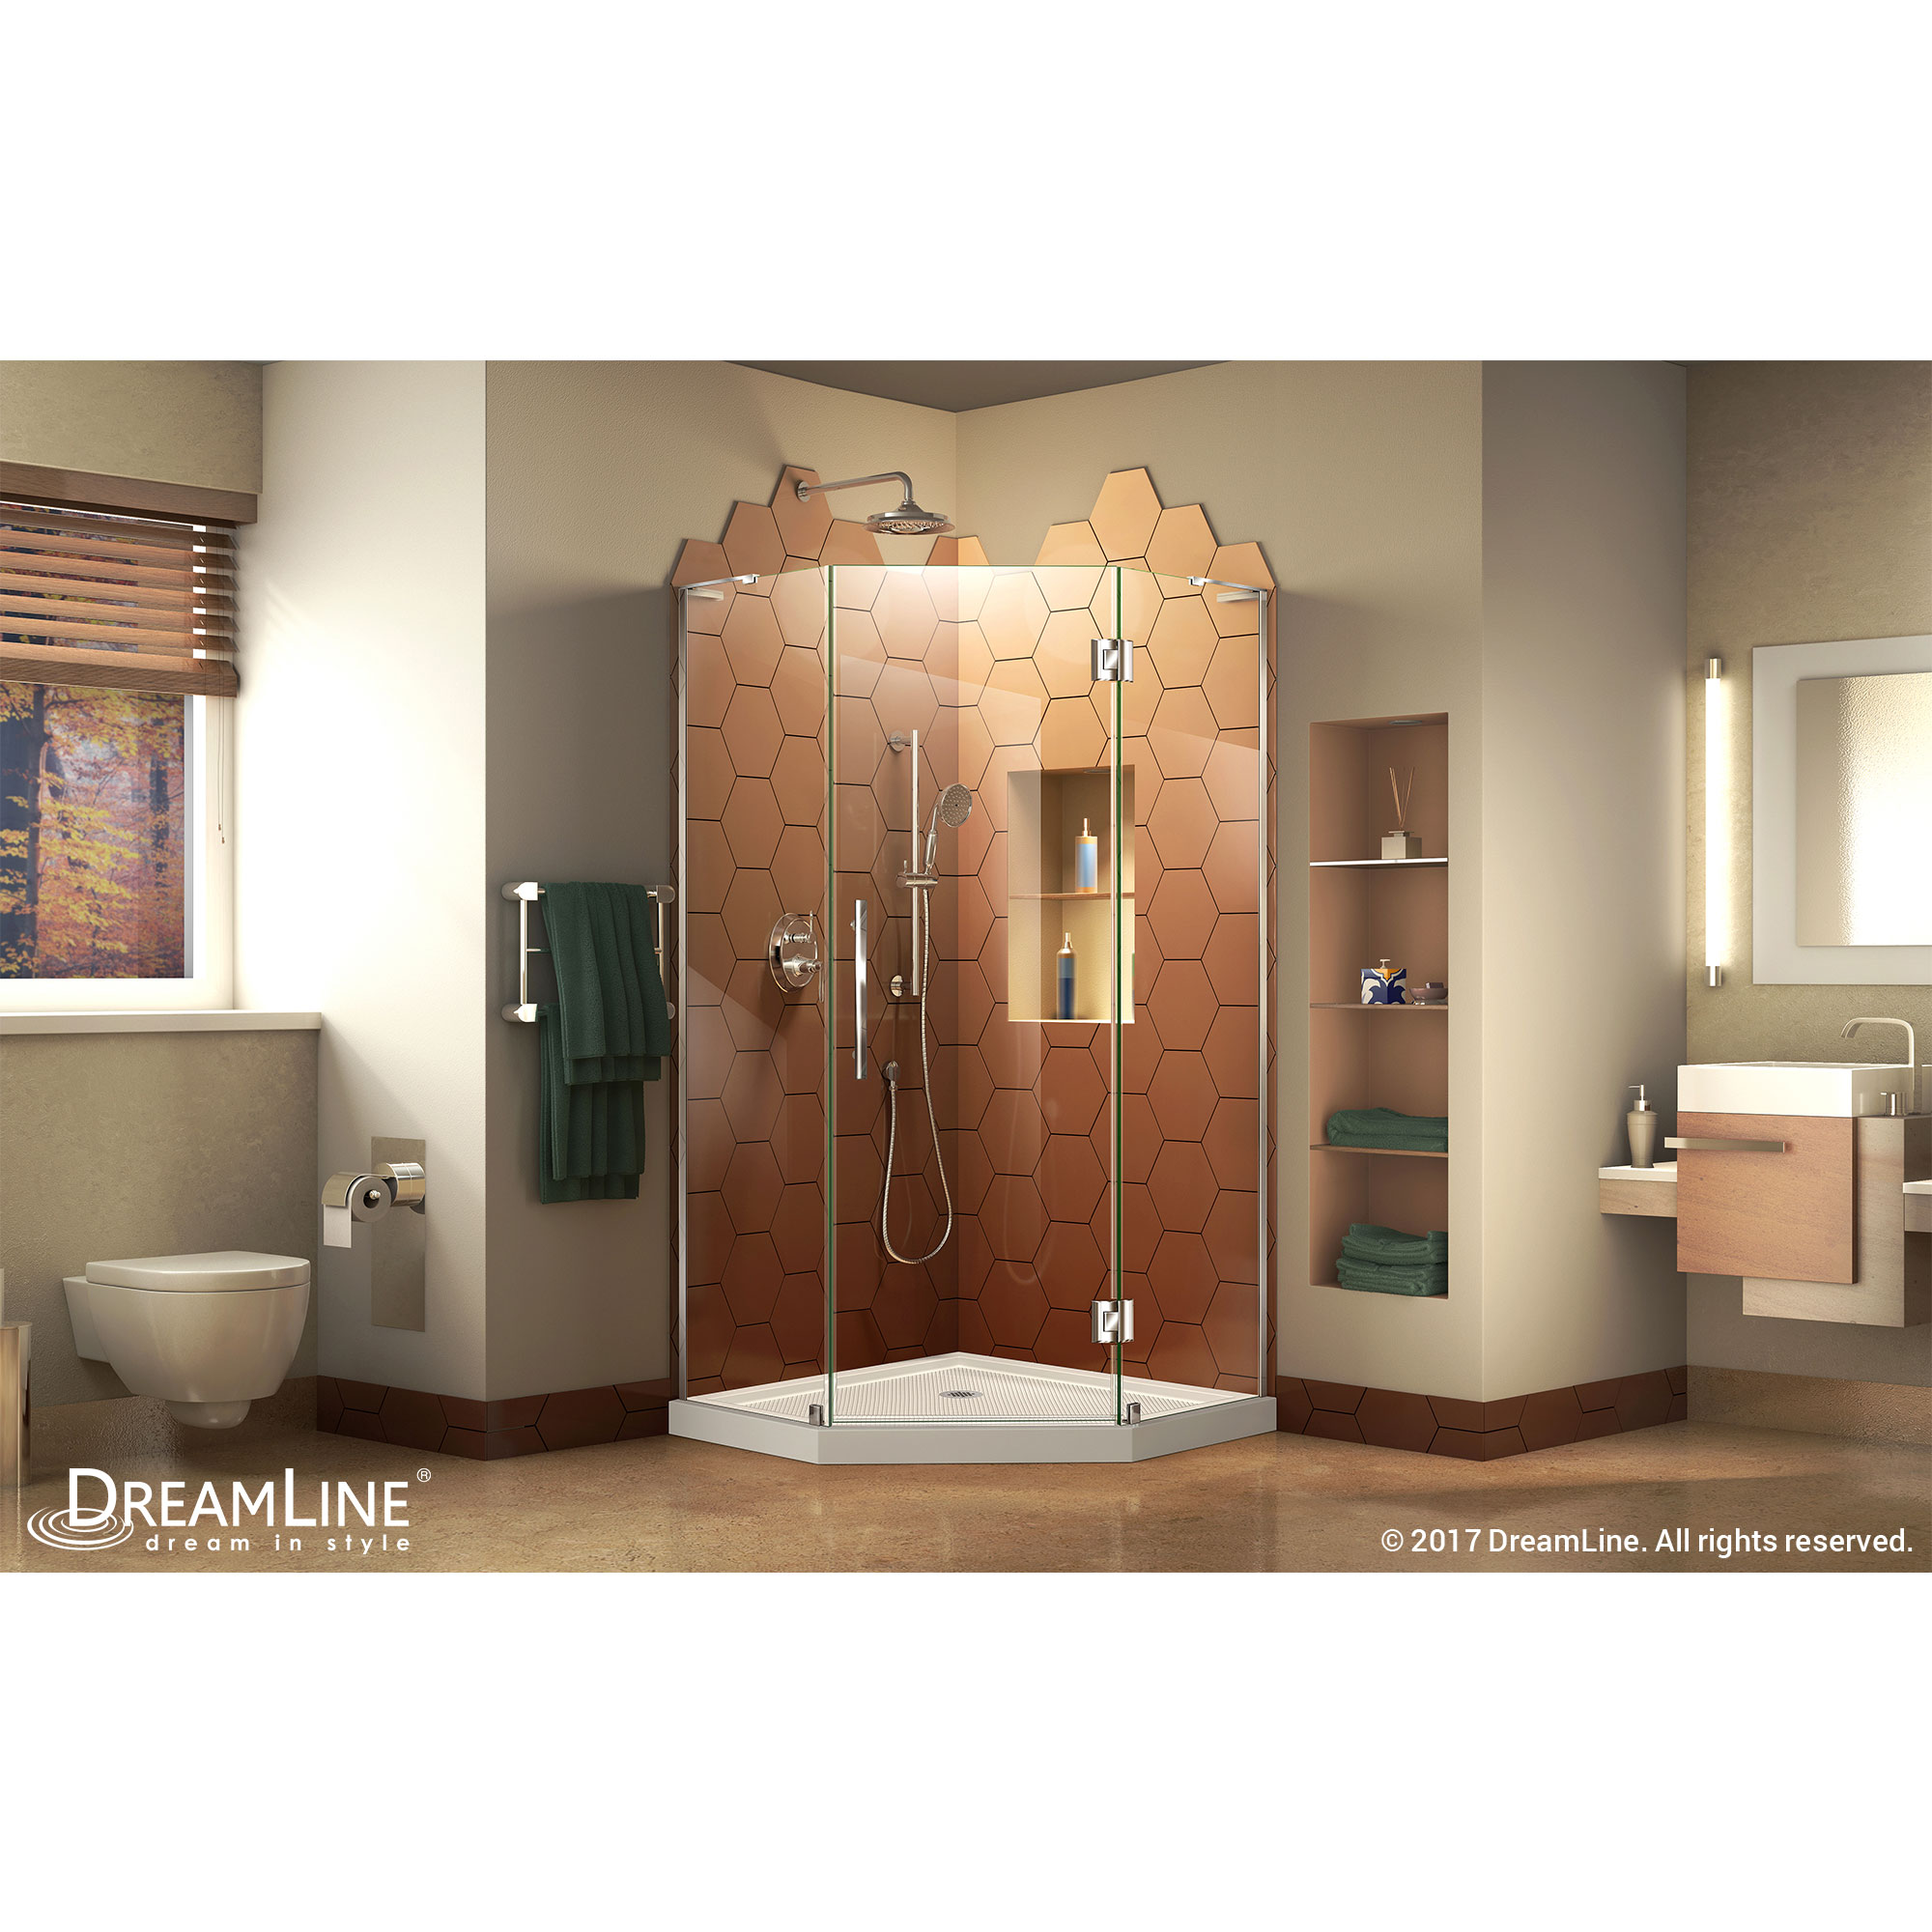 DreamLine Prism Plus 42 in. D x 42 in. W x 74 3/4 in. H Hinged Shower Enclosure in Chrome with Corner Drain Biscuit Base